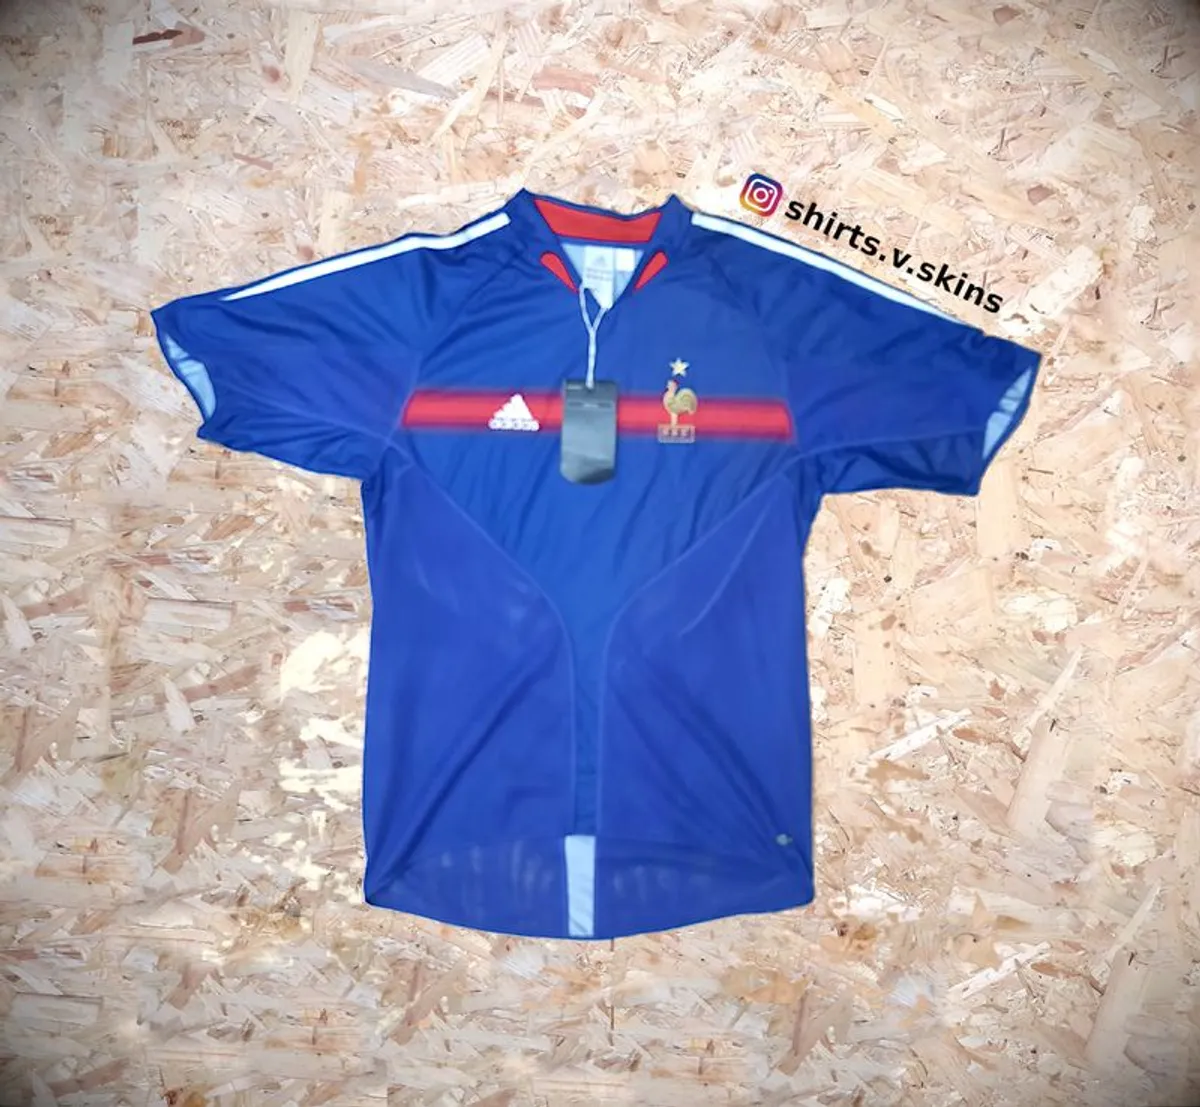 FREE POST Vintage France Jersey 2004 adidas shirt  BNWT Soccer Football Vintage Retro Blue Brand New With Tags - Image 1